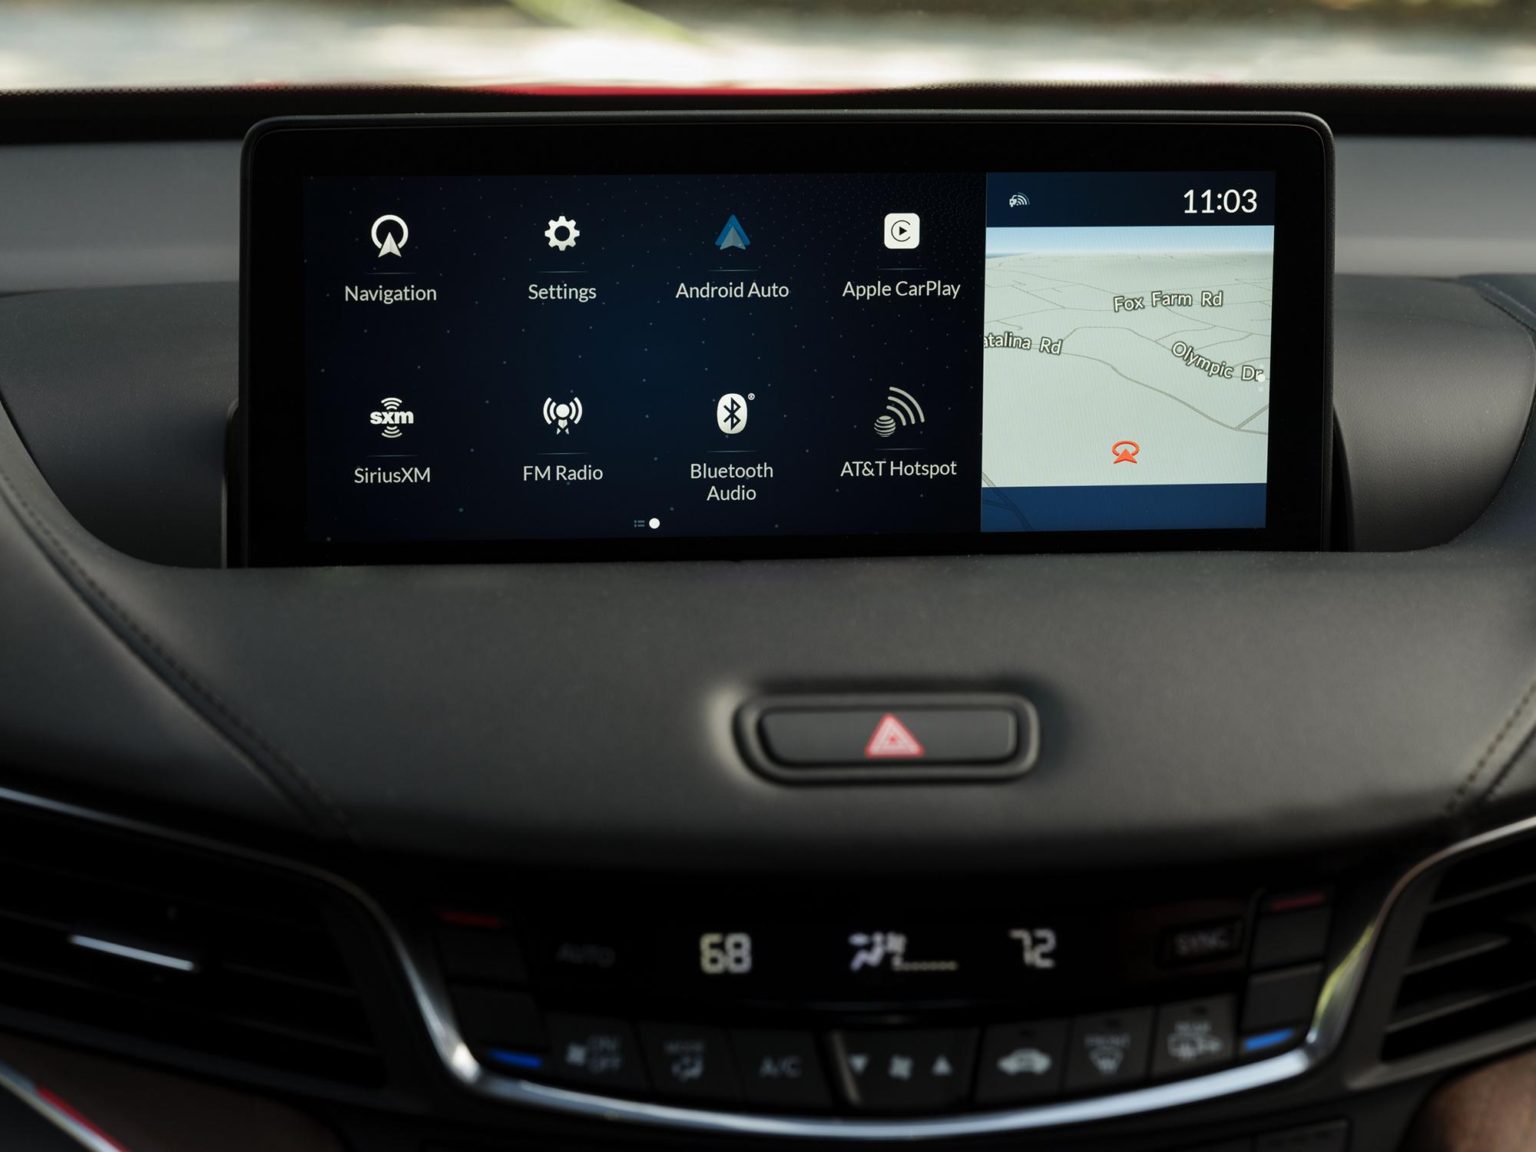 The 2022 Acura TLX has the technology enabled.